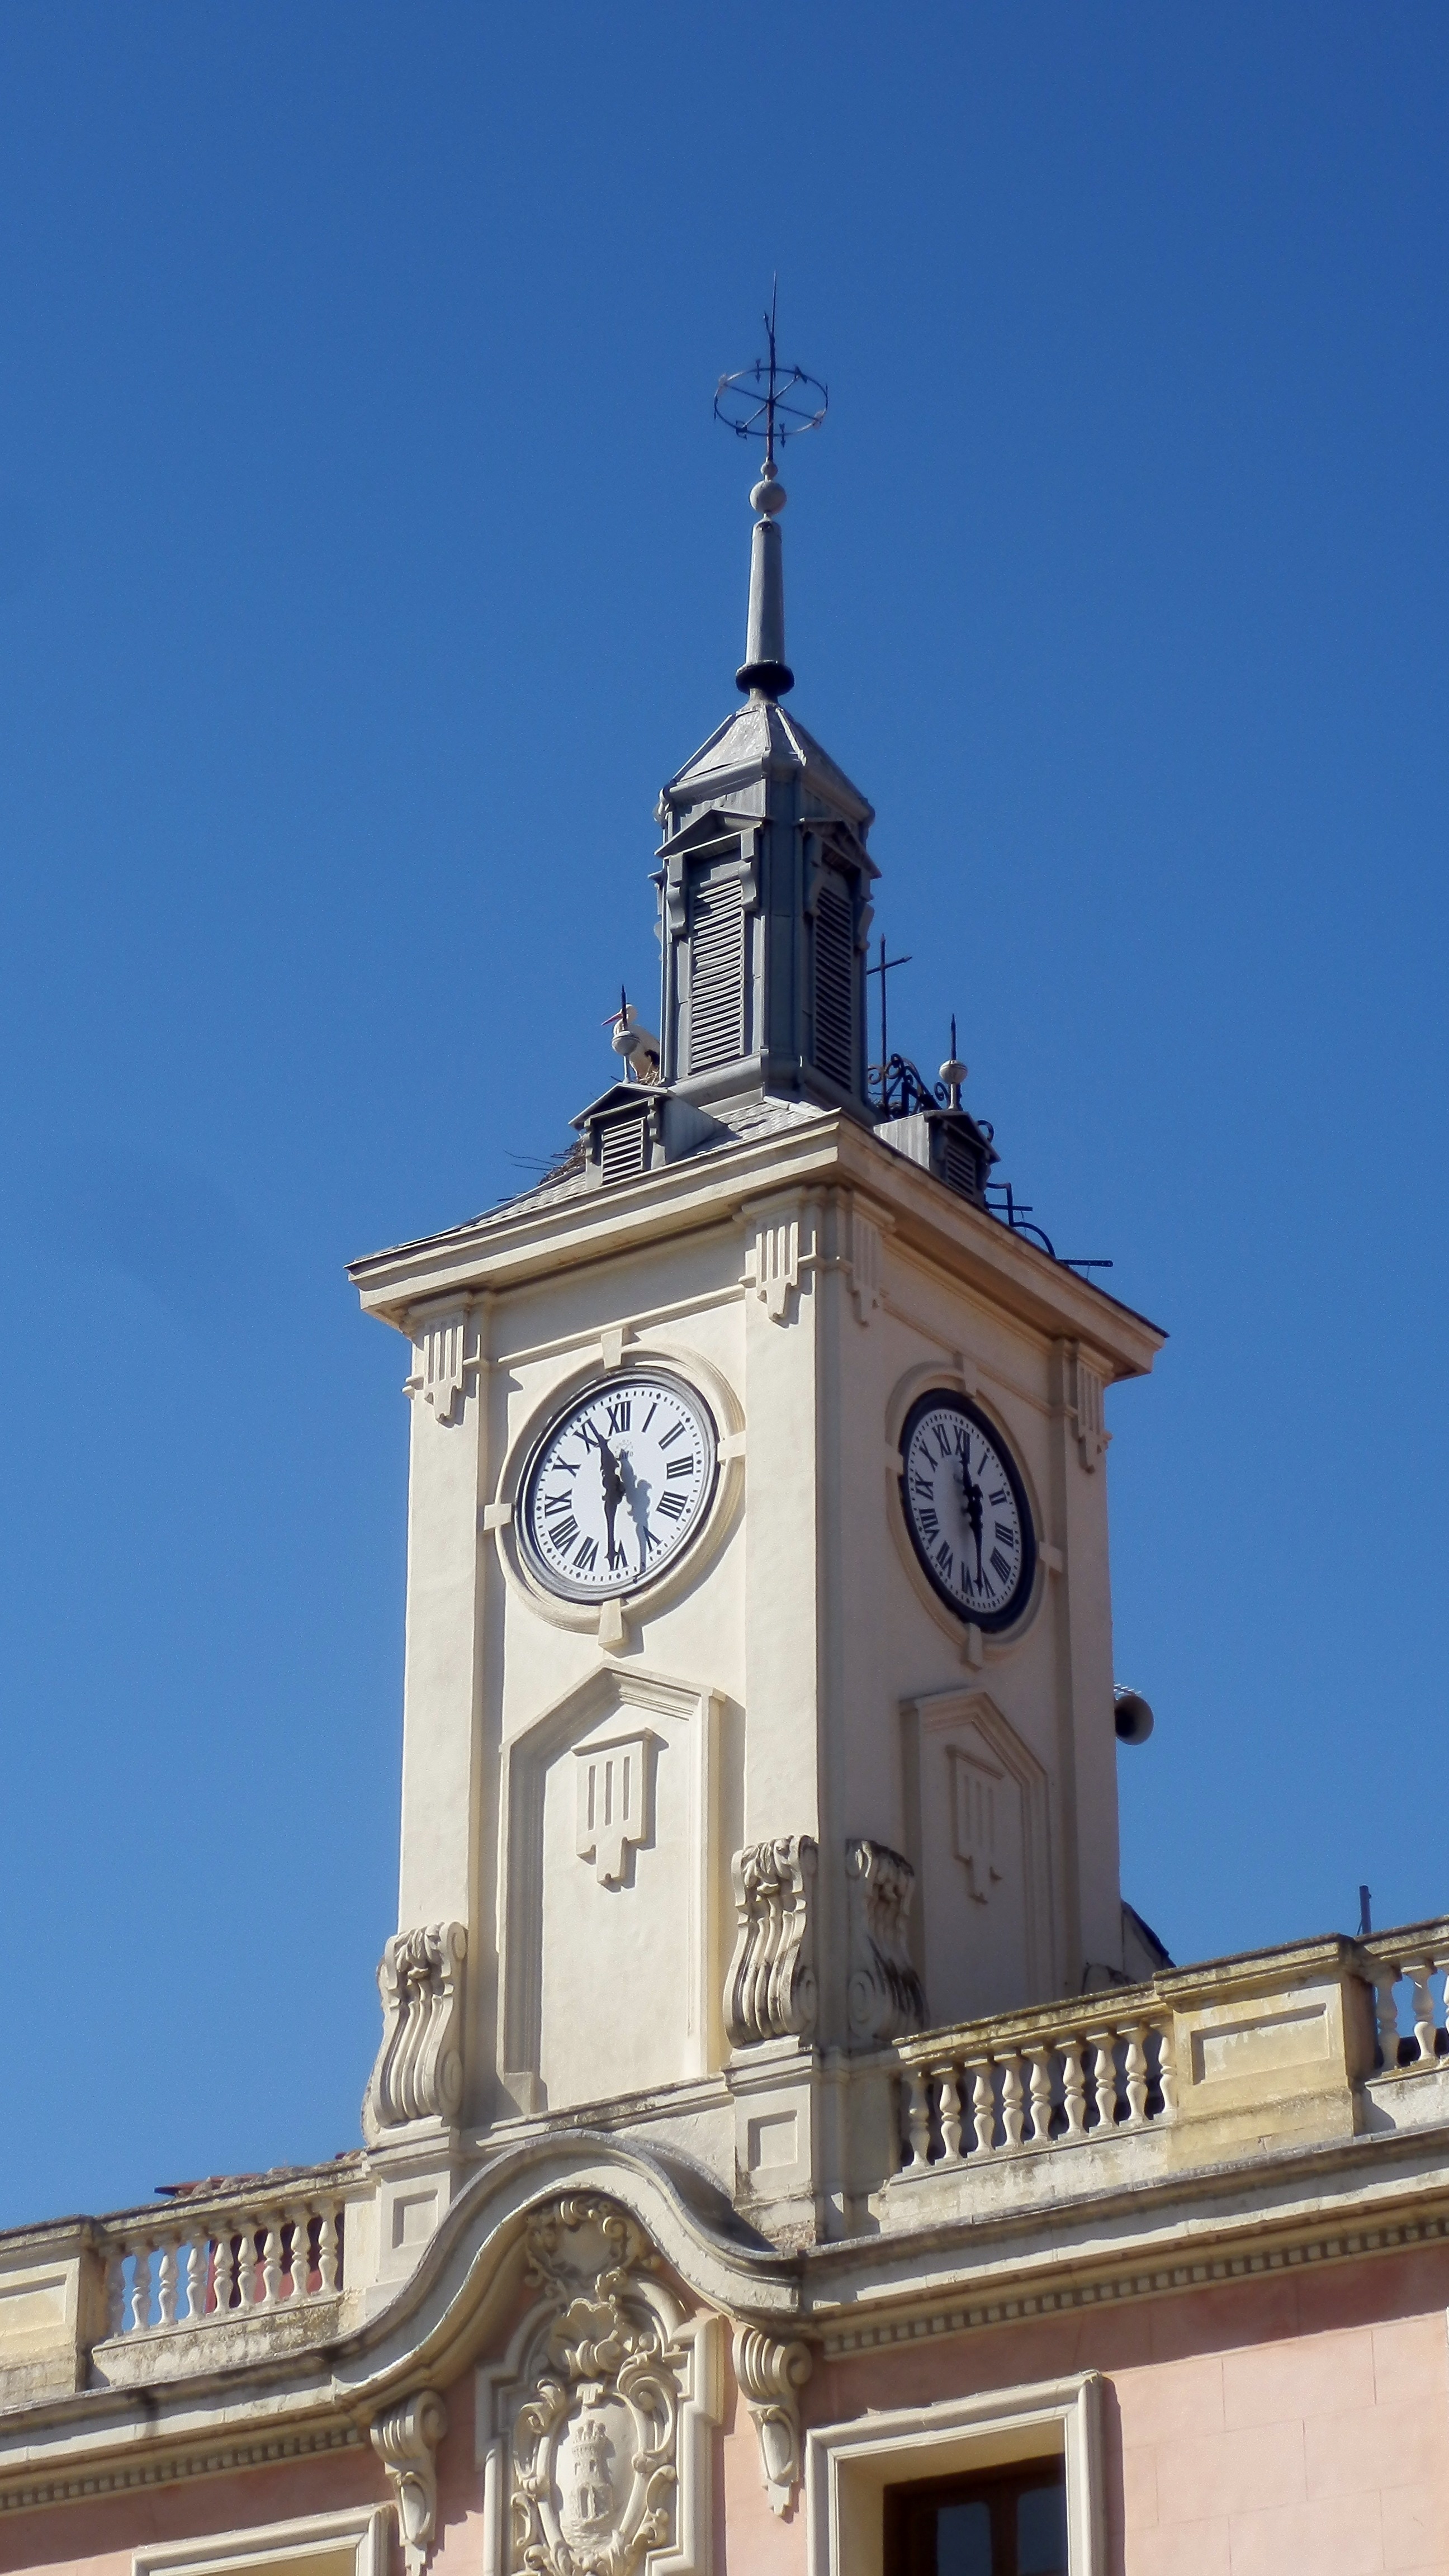 white and gray concrete tower with clock